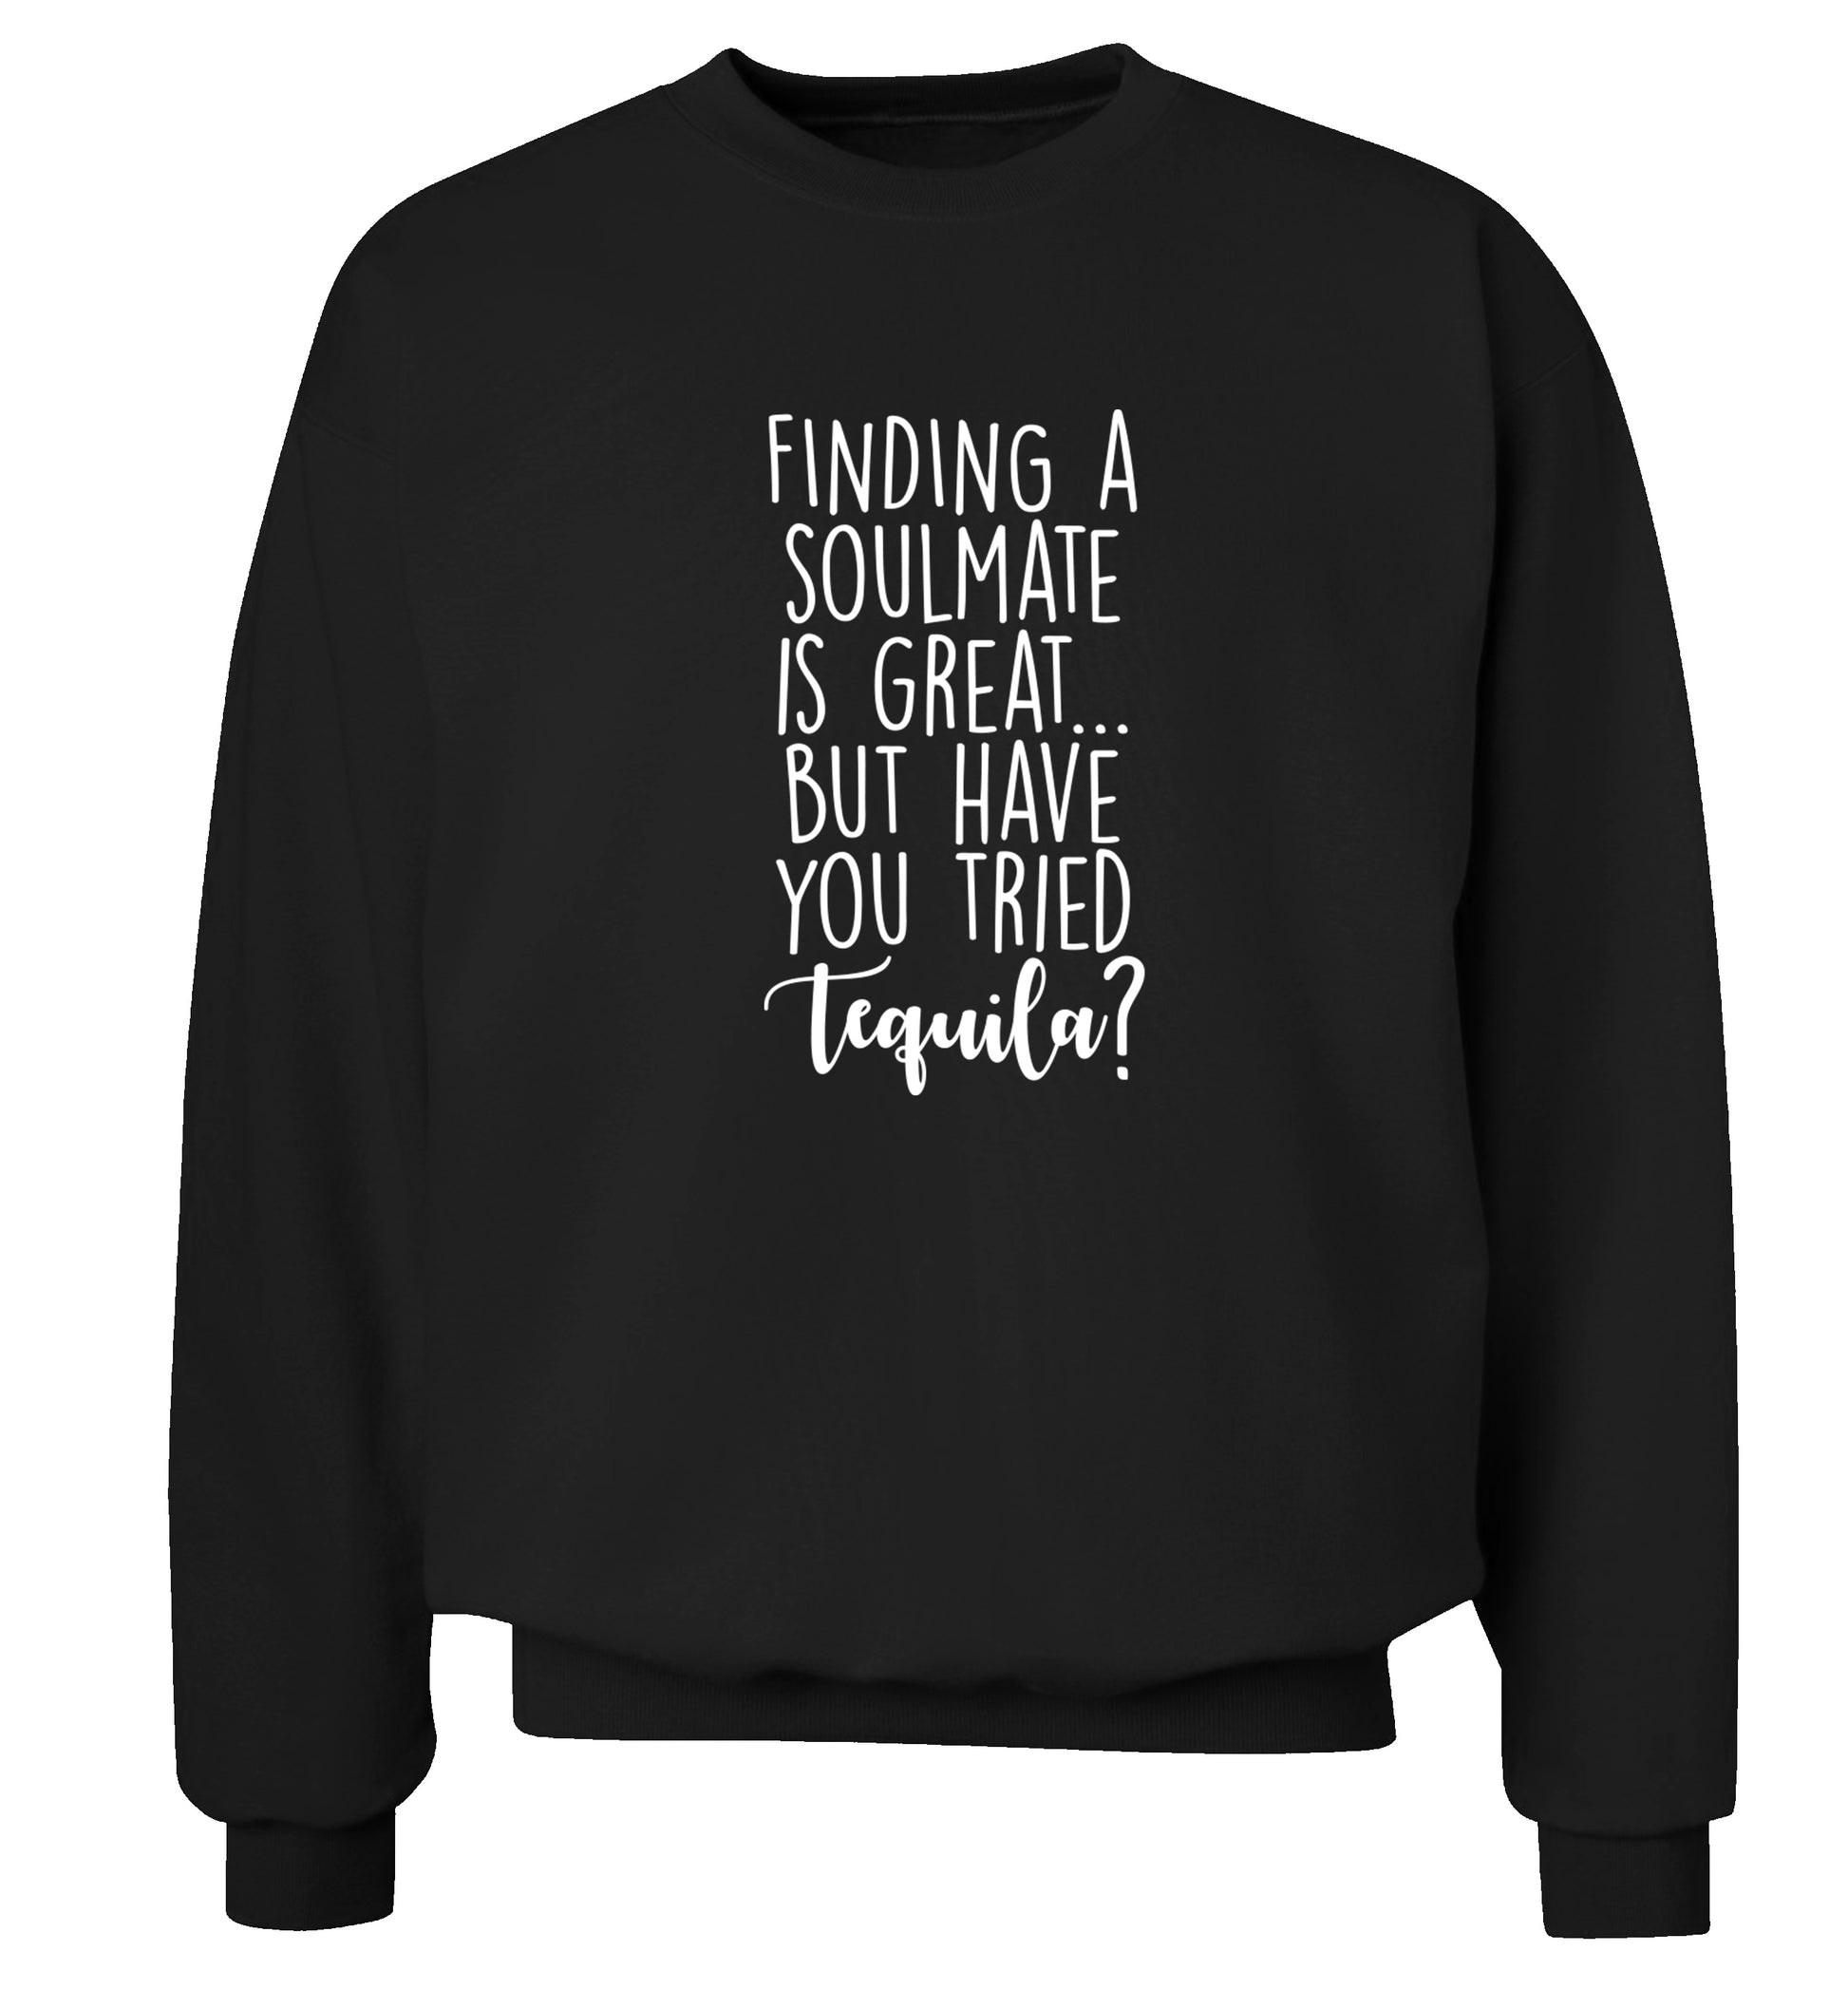 Finding a soulmate is great but have you tried tequila? Adult's unisex black Sweater 2XL